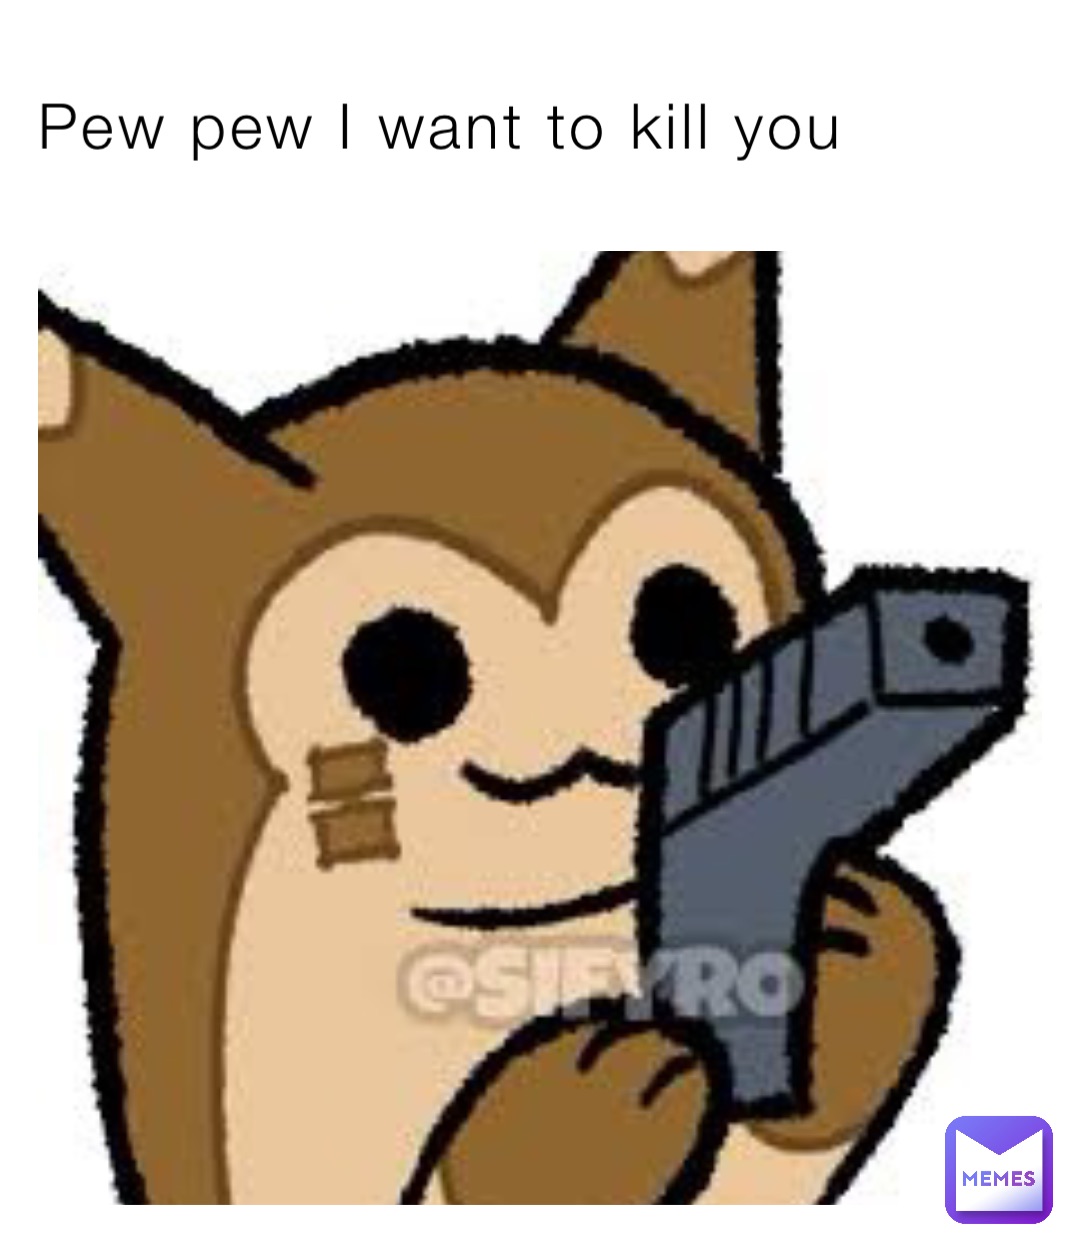 Pew pew I want to kill you